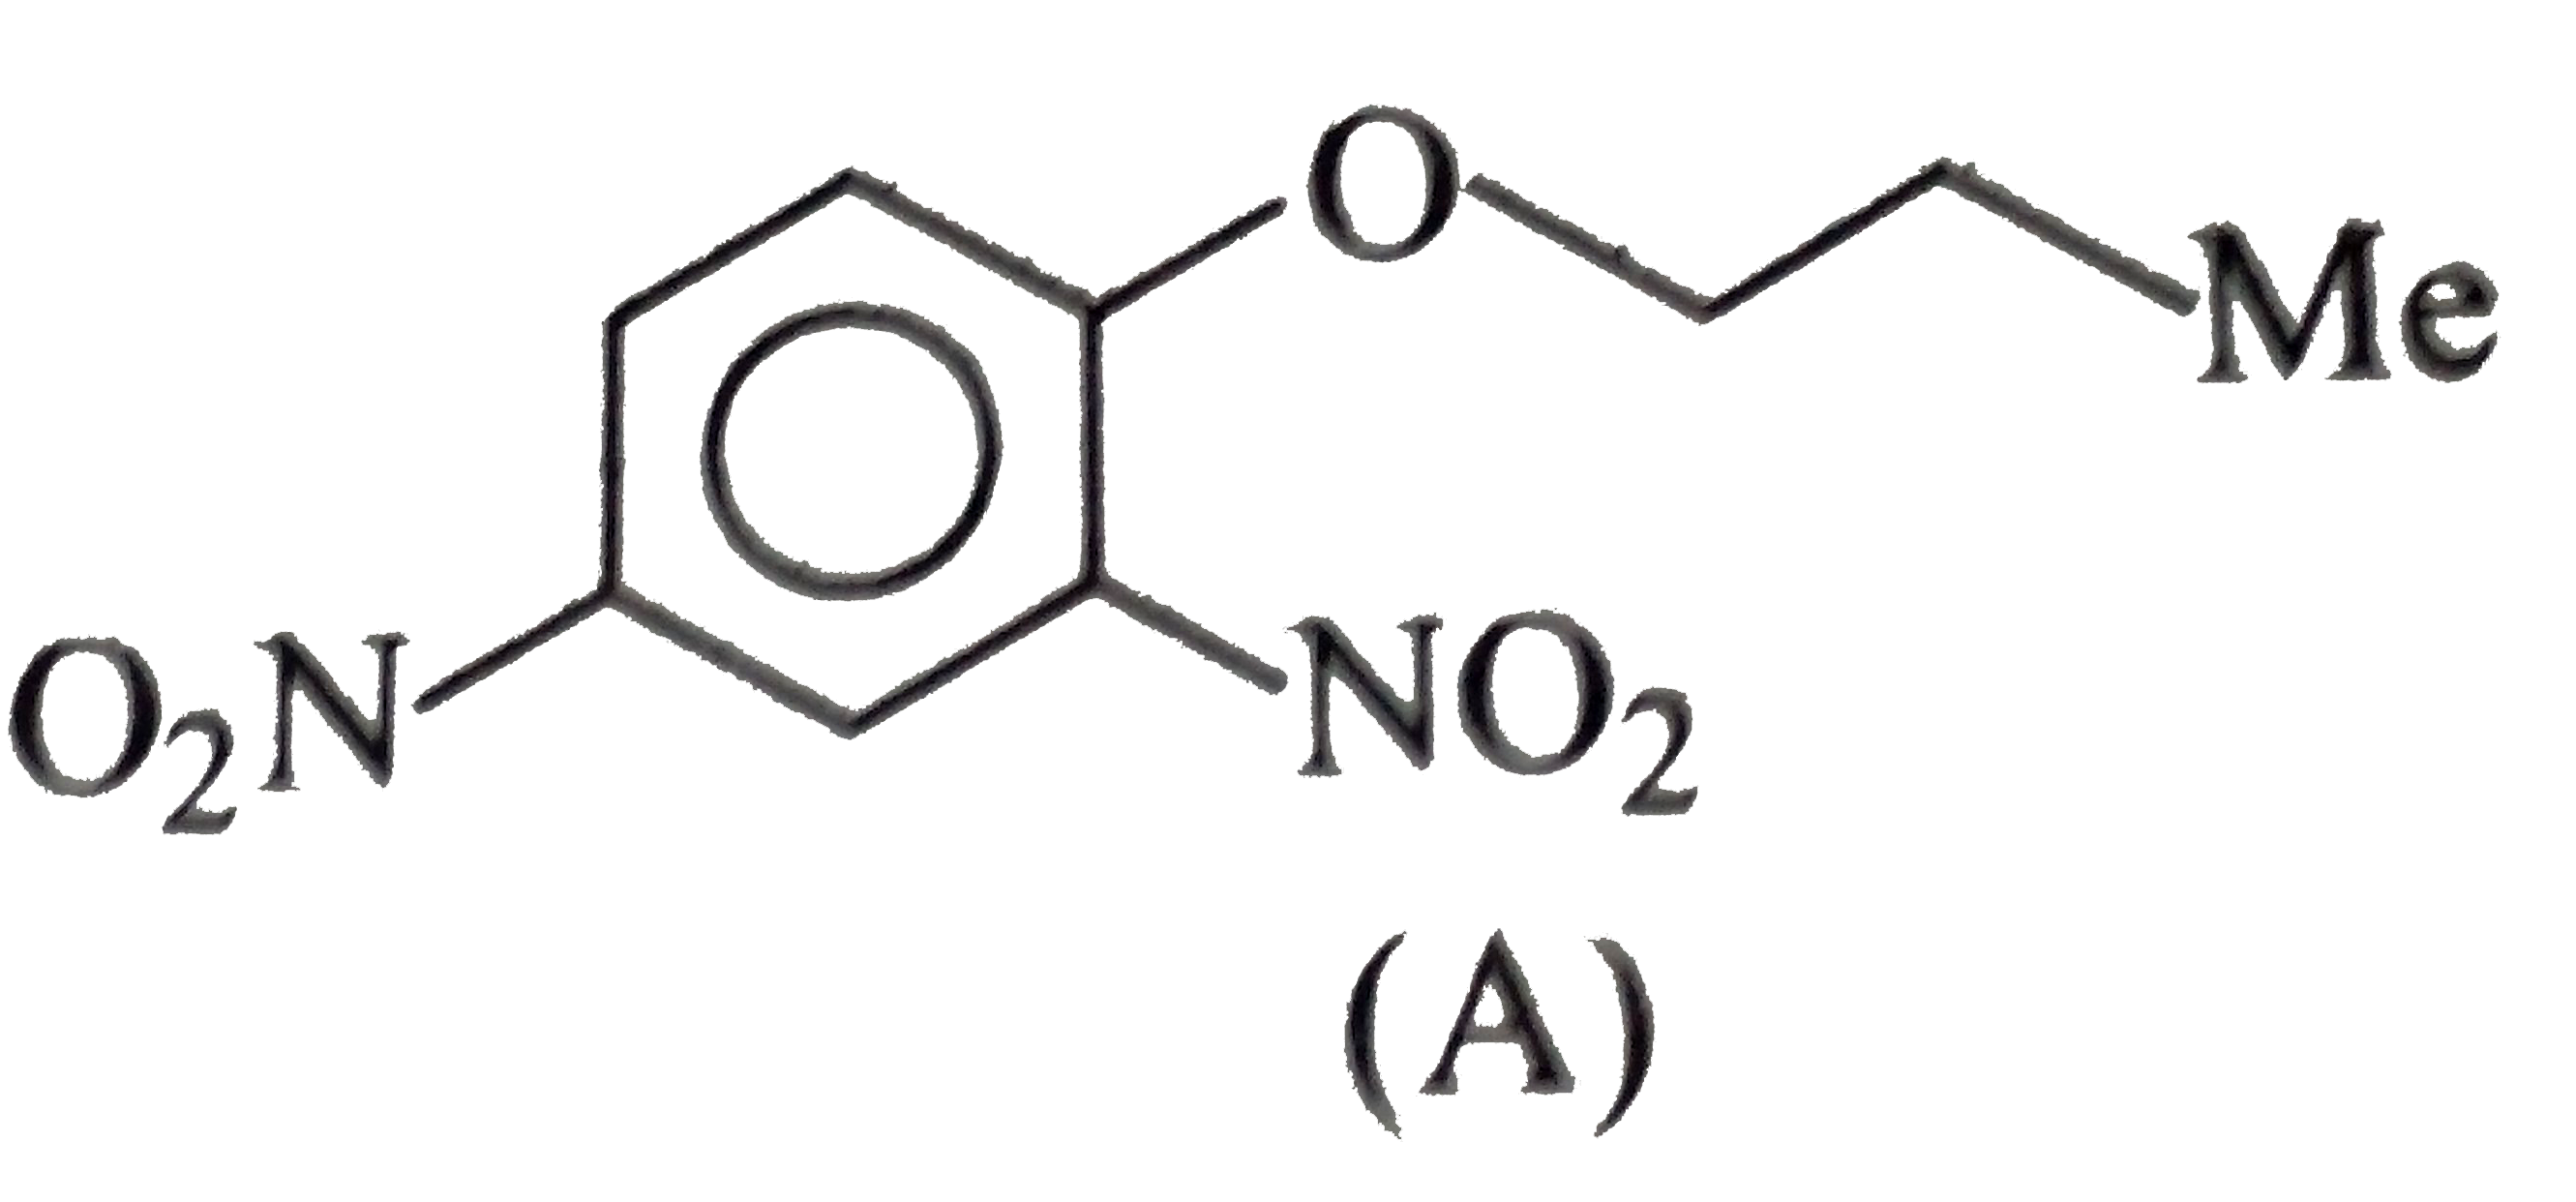 Convert benzene to the following compounds: